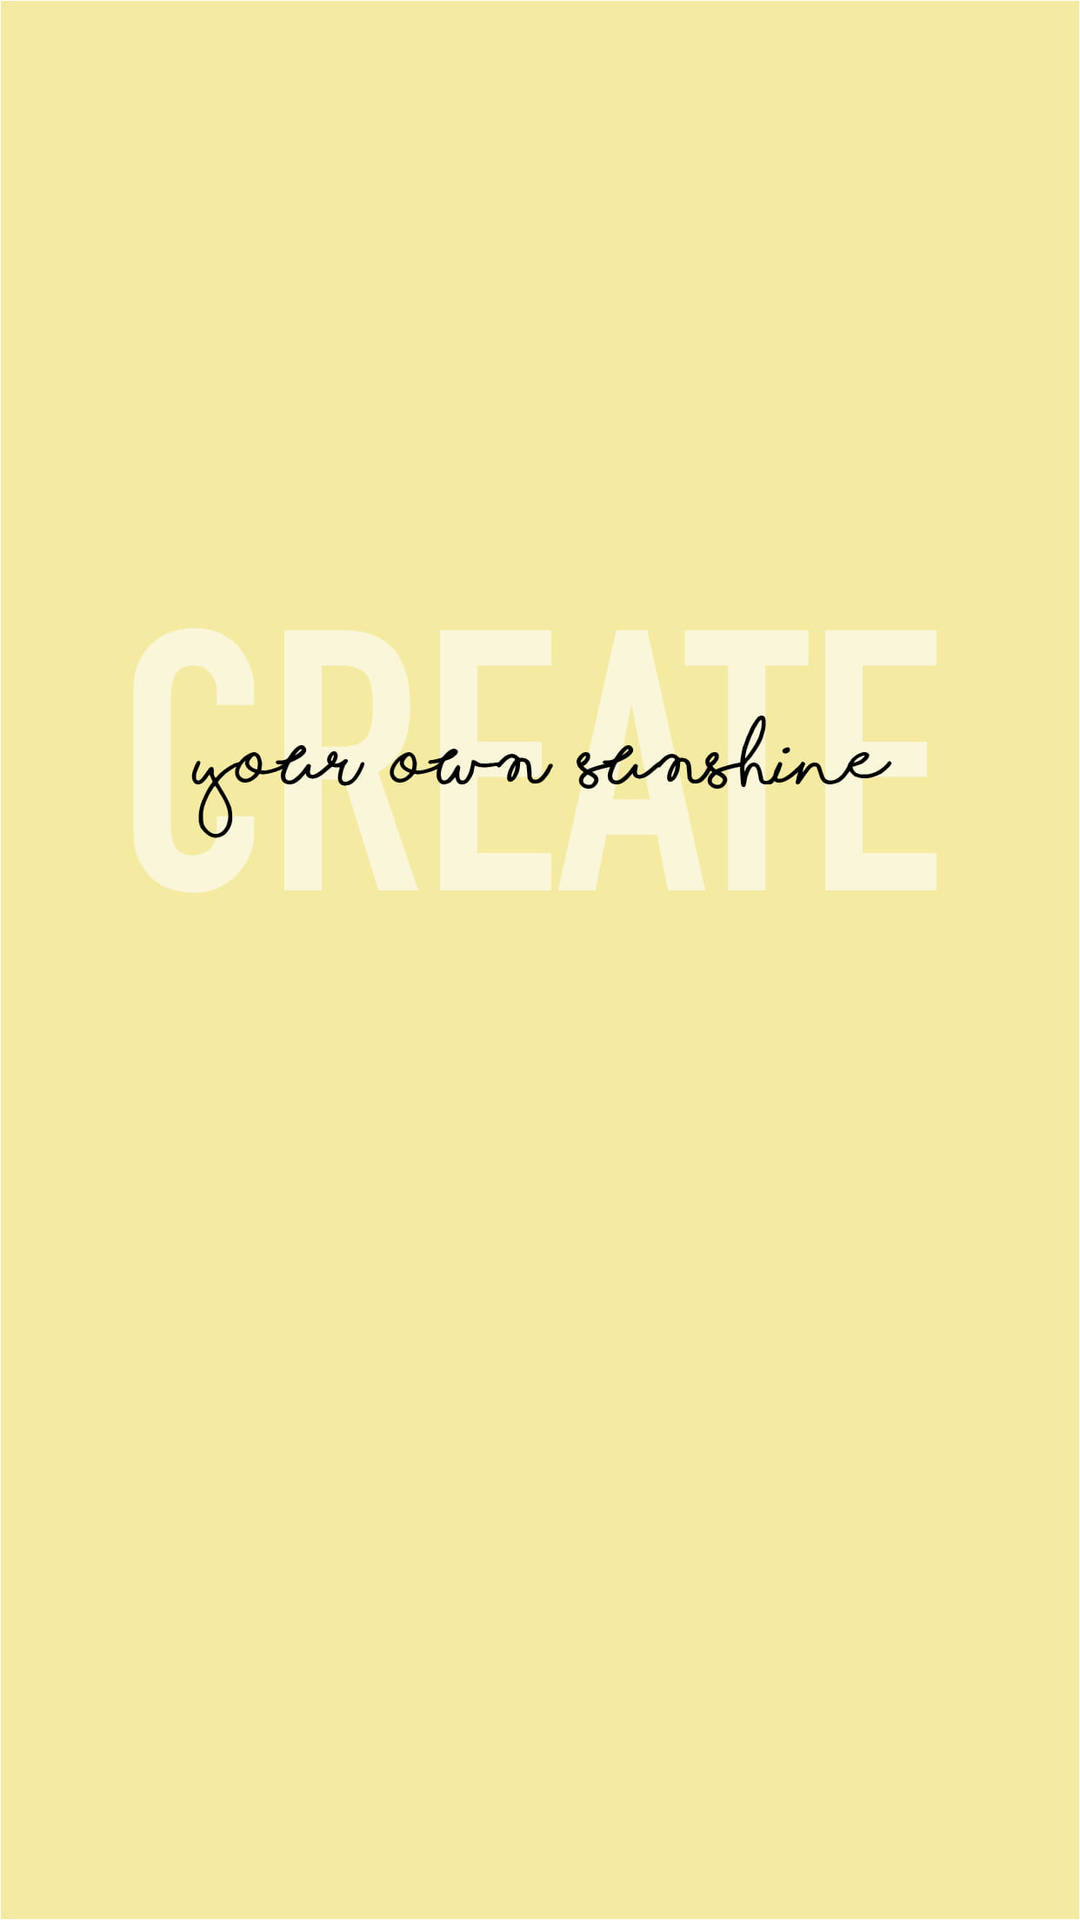 Pastel Yellow Aesthetic With Simple Text Background